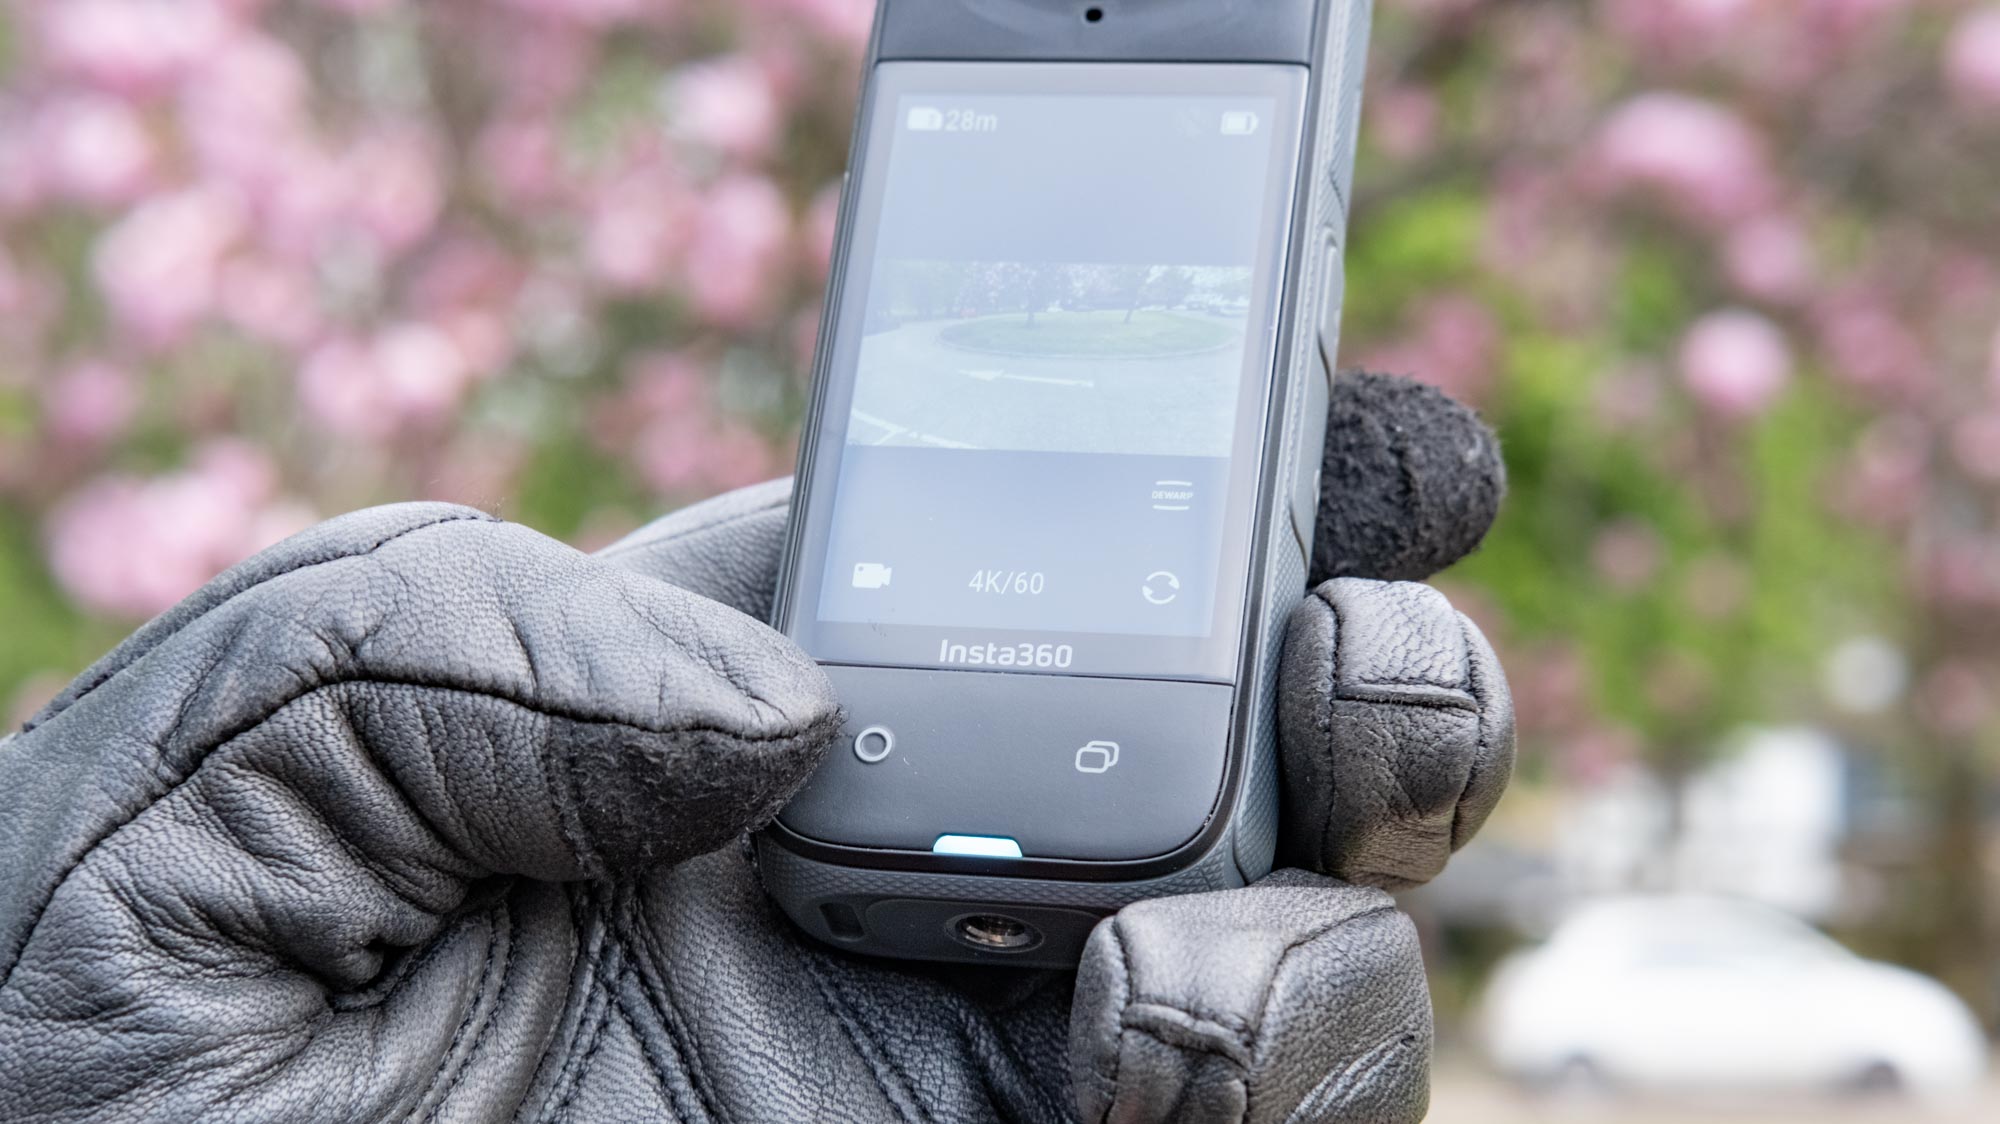 A photo of the Insta360 X4 being held in a leather gloved hand with a thumb about to press the record button.